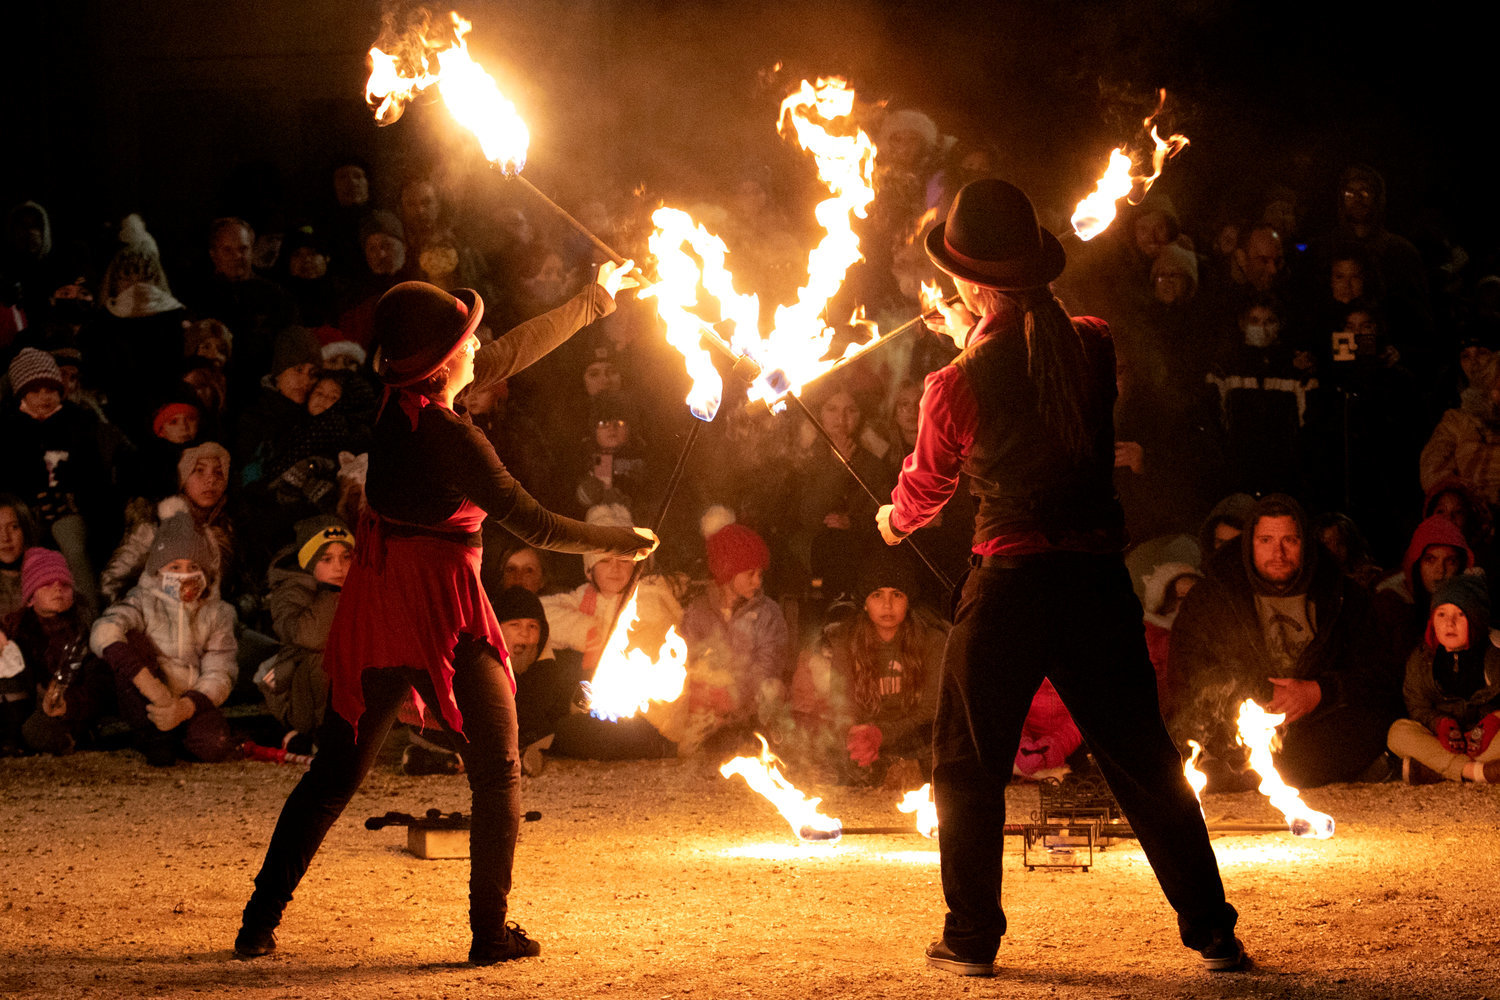 Fire spinners from last year’s Holiday Festival dazzle a crowd. Festival-goers can expect more of their impressive displays on Friday during two shows occurring at 5:15 and 6:15 at 39 Baker St.